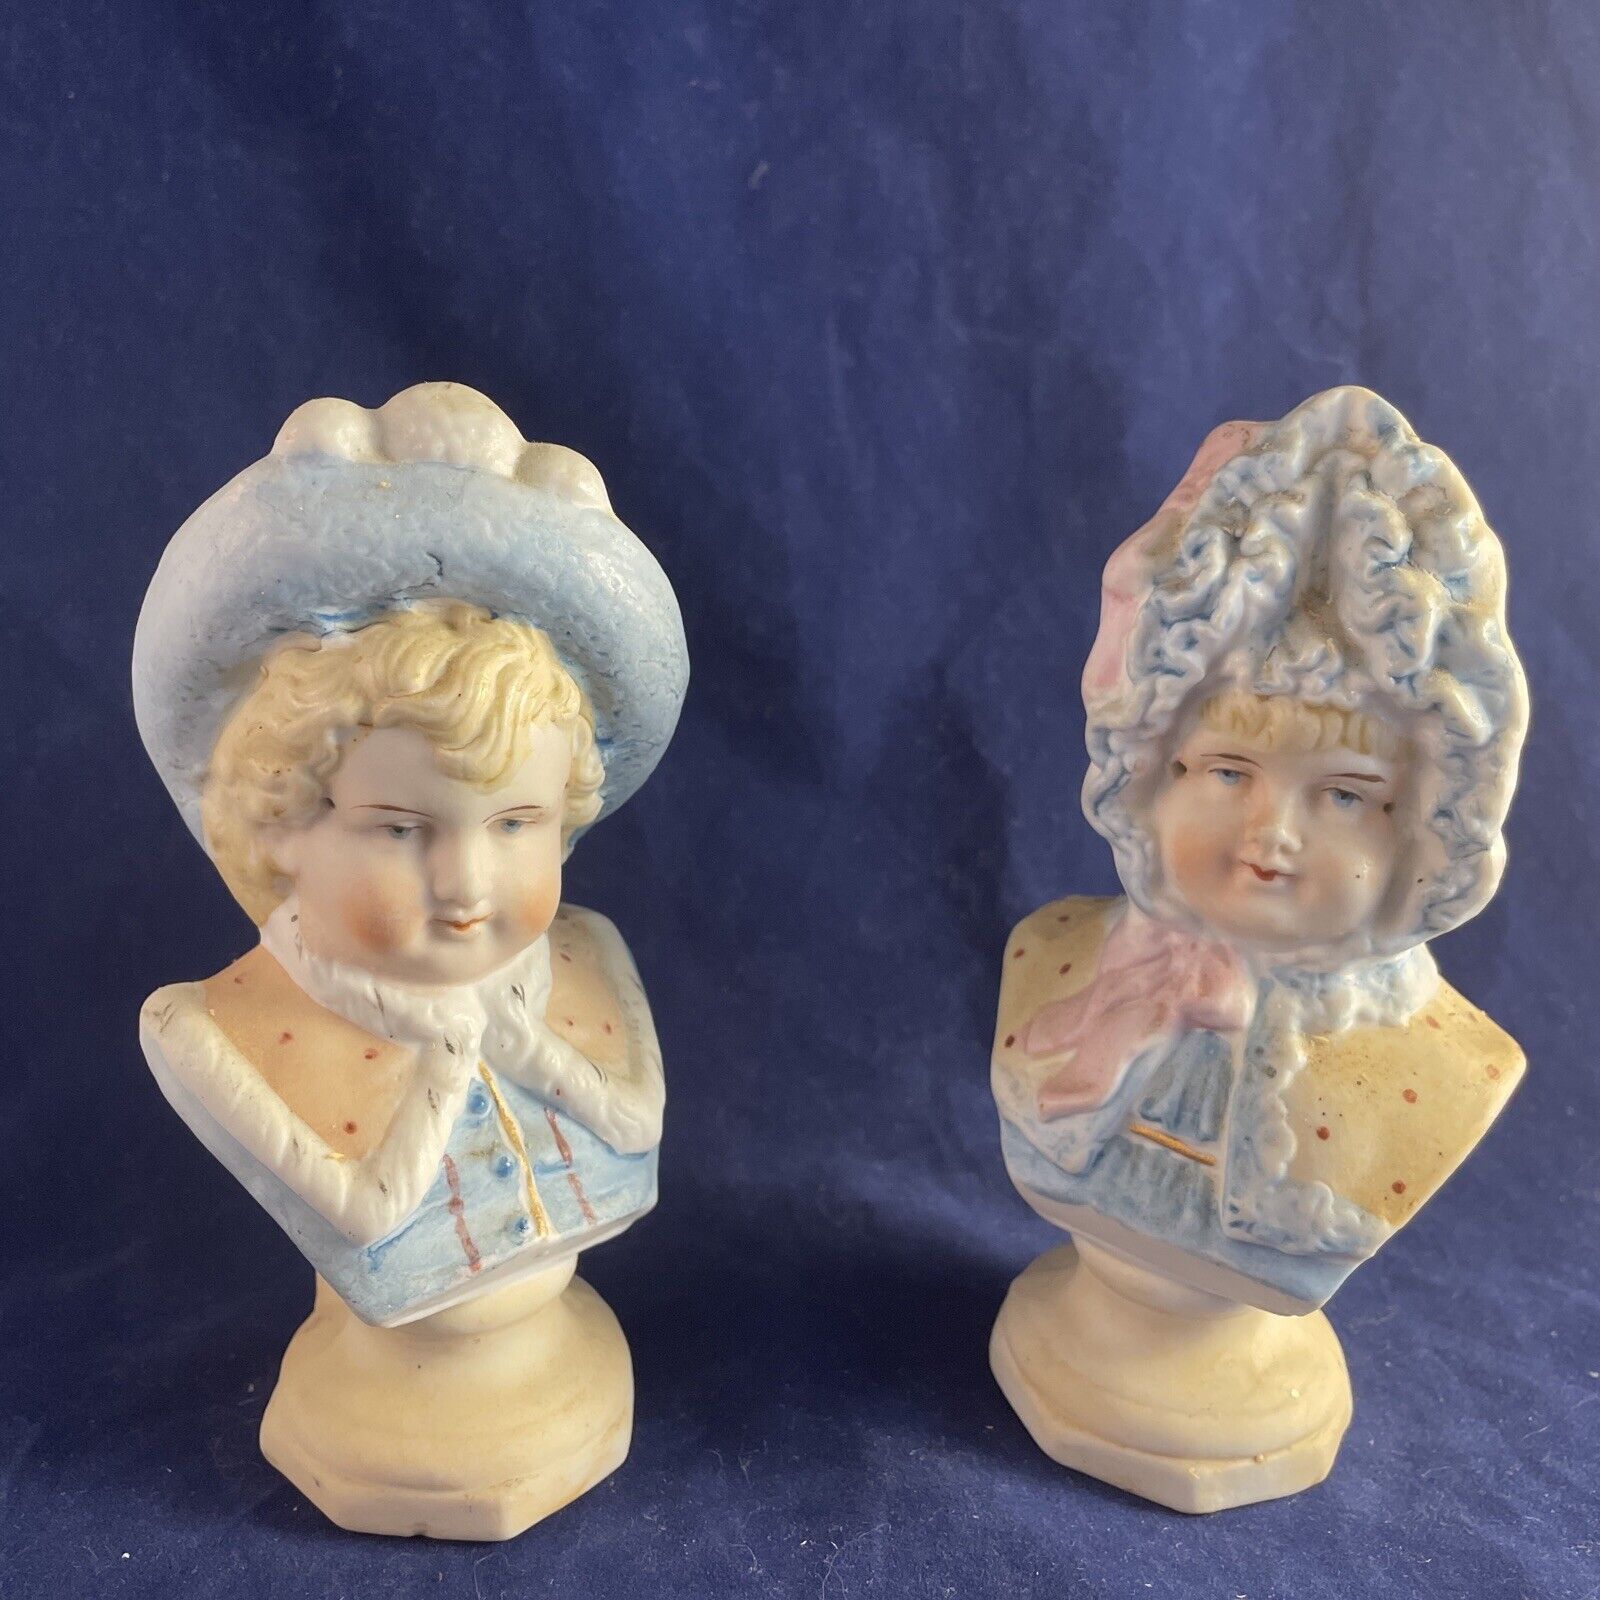 19TH C. HERTWIG & CO.GERMANY PORCELAIN HAND-PAINTED BOY & GIRL BUST FIGURINE SET